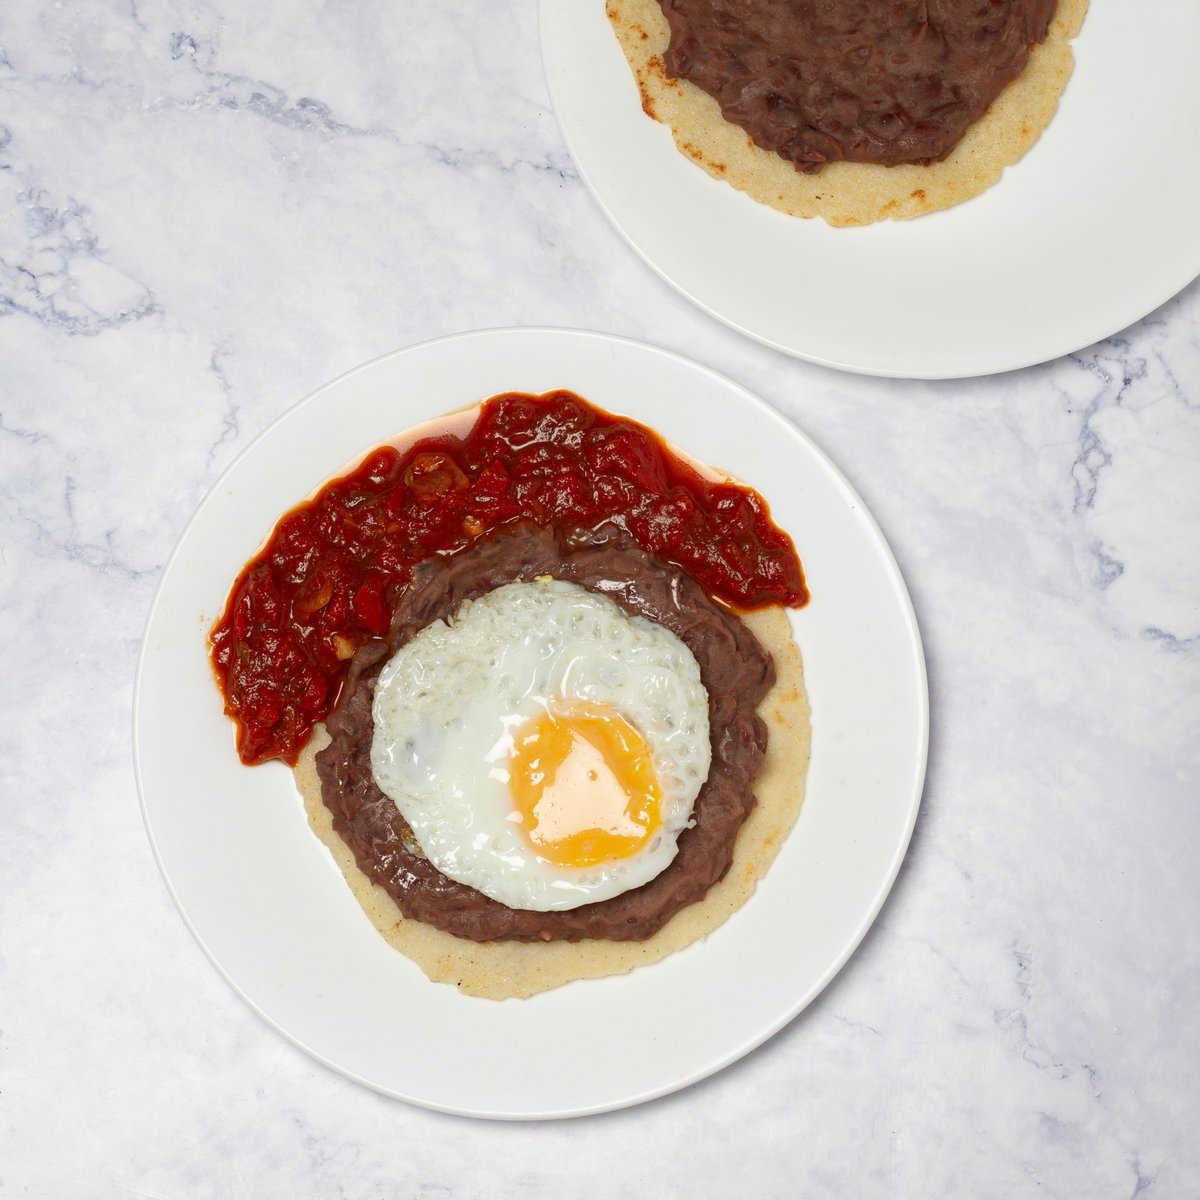 Spoon cooked beans onto each tortilla and topped with a fried egg